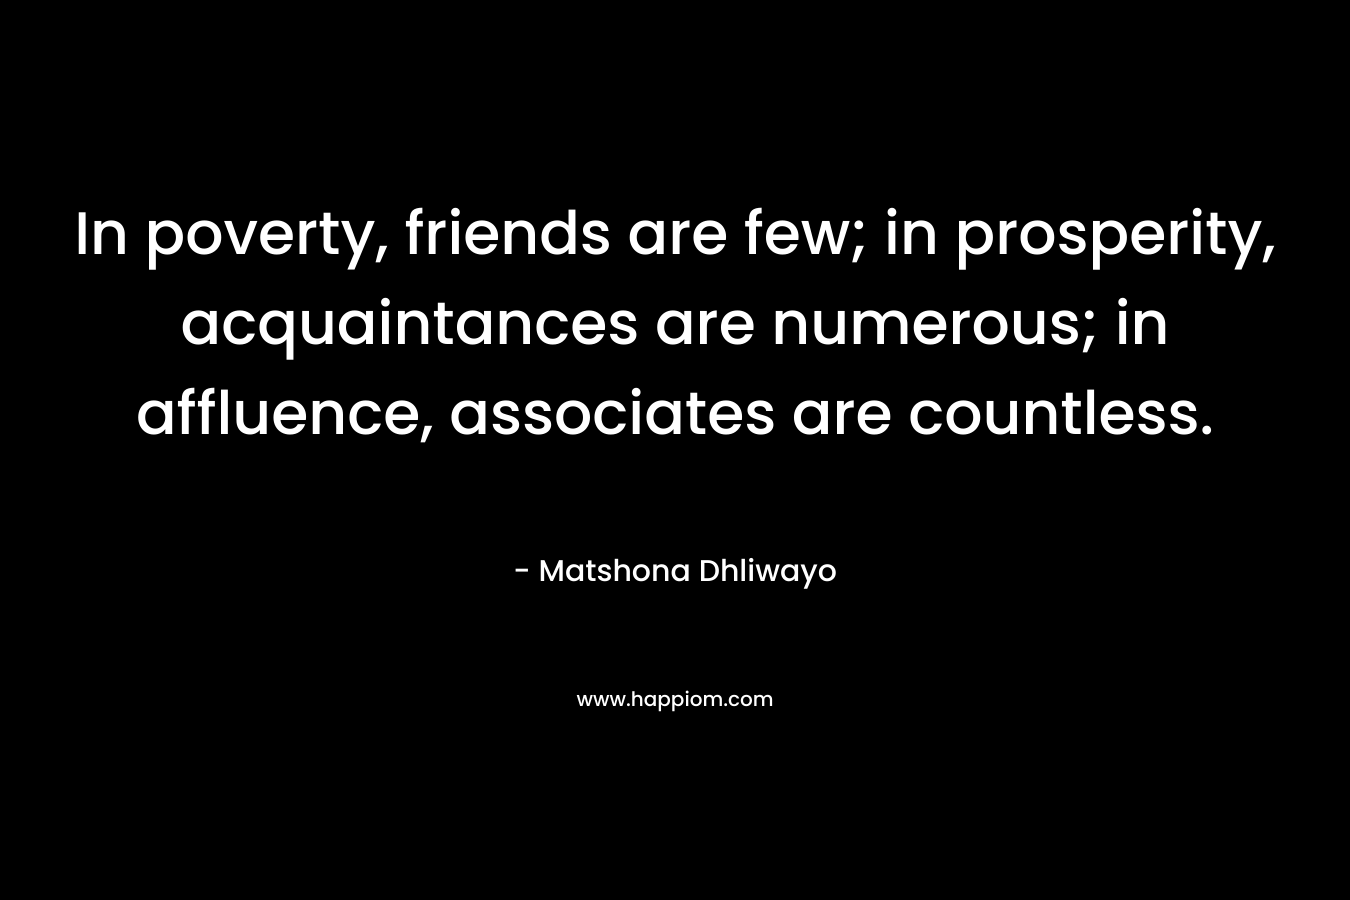 In poverty, friends are few; in prosperity, acquaintances are numerous; in affluence, associates are countless. – Matshona Dhliwayo